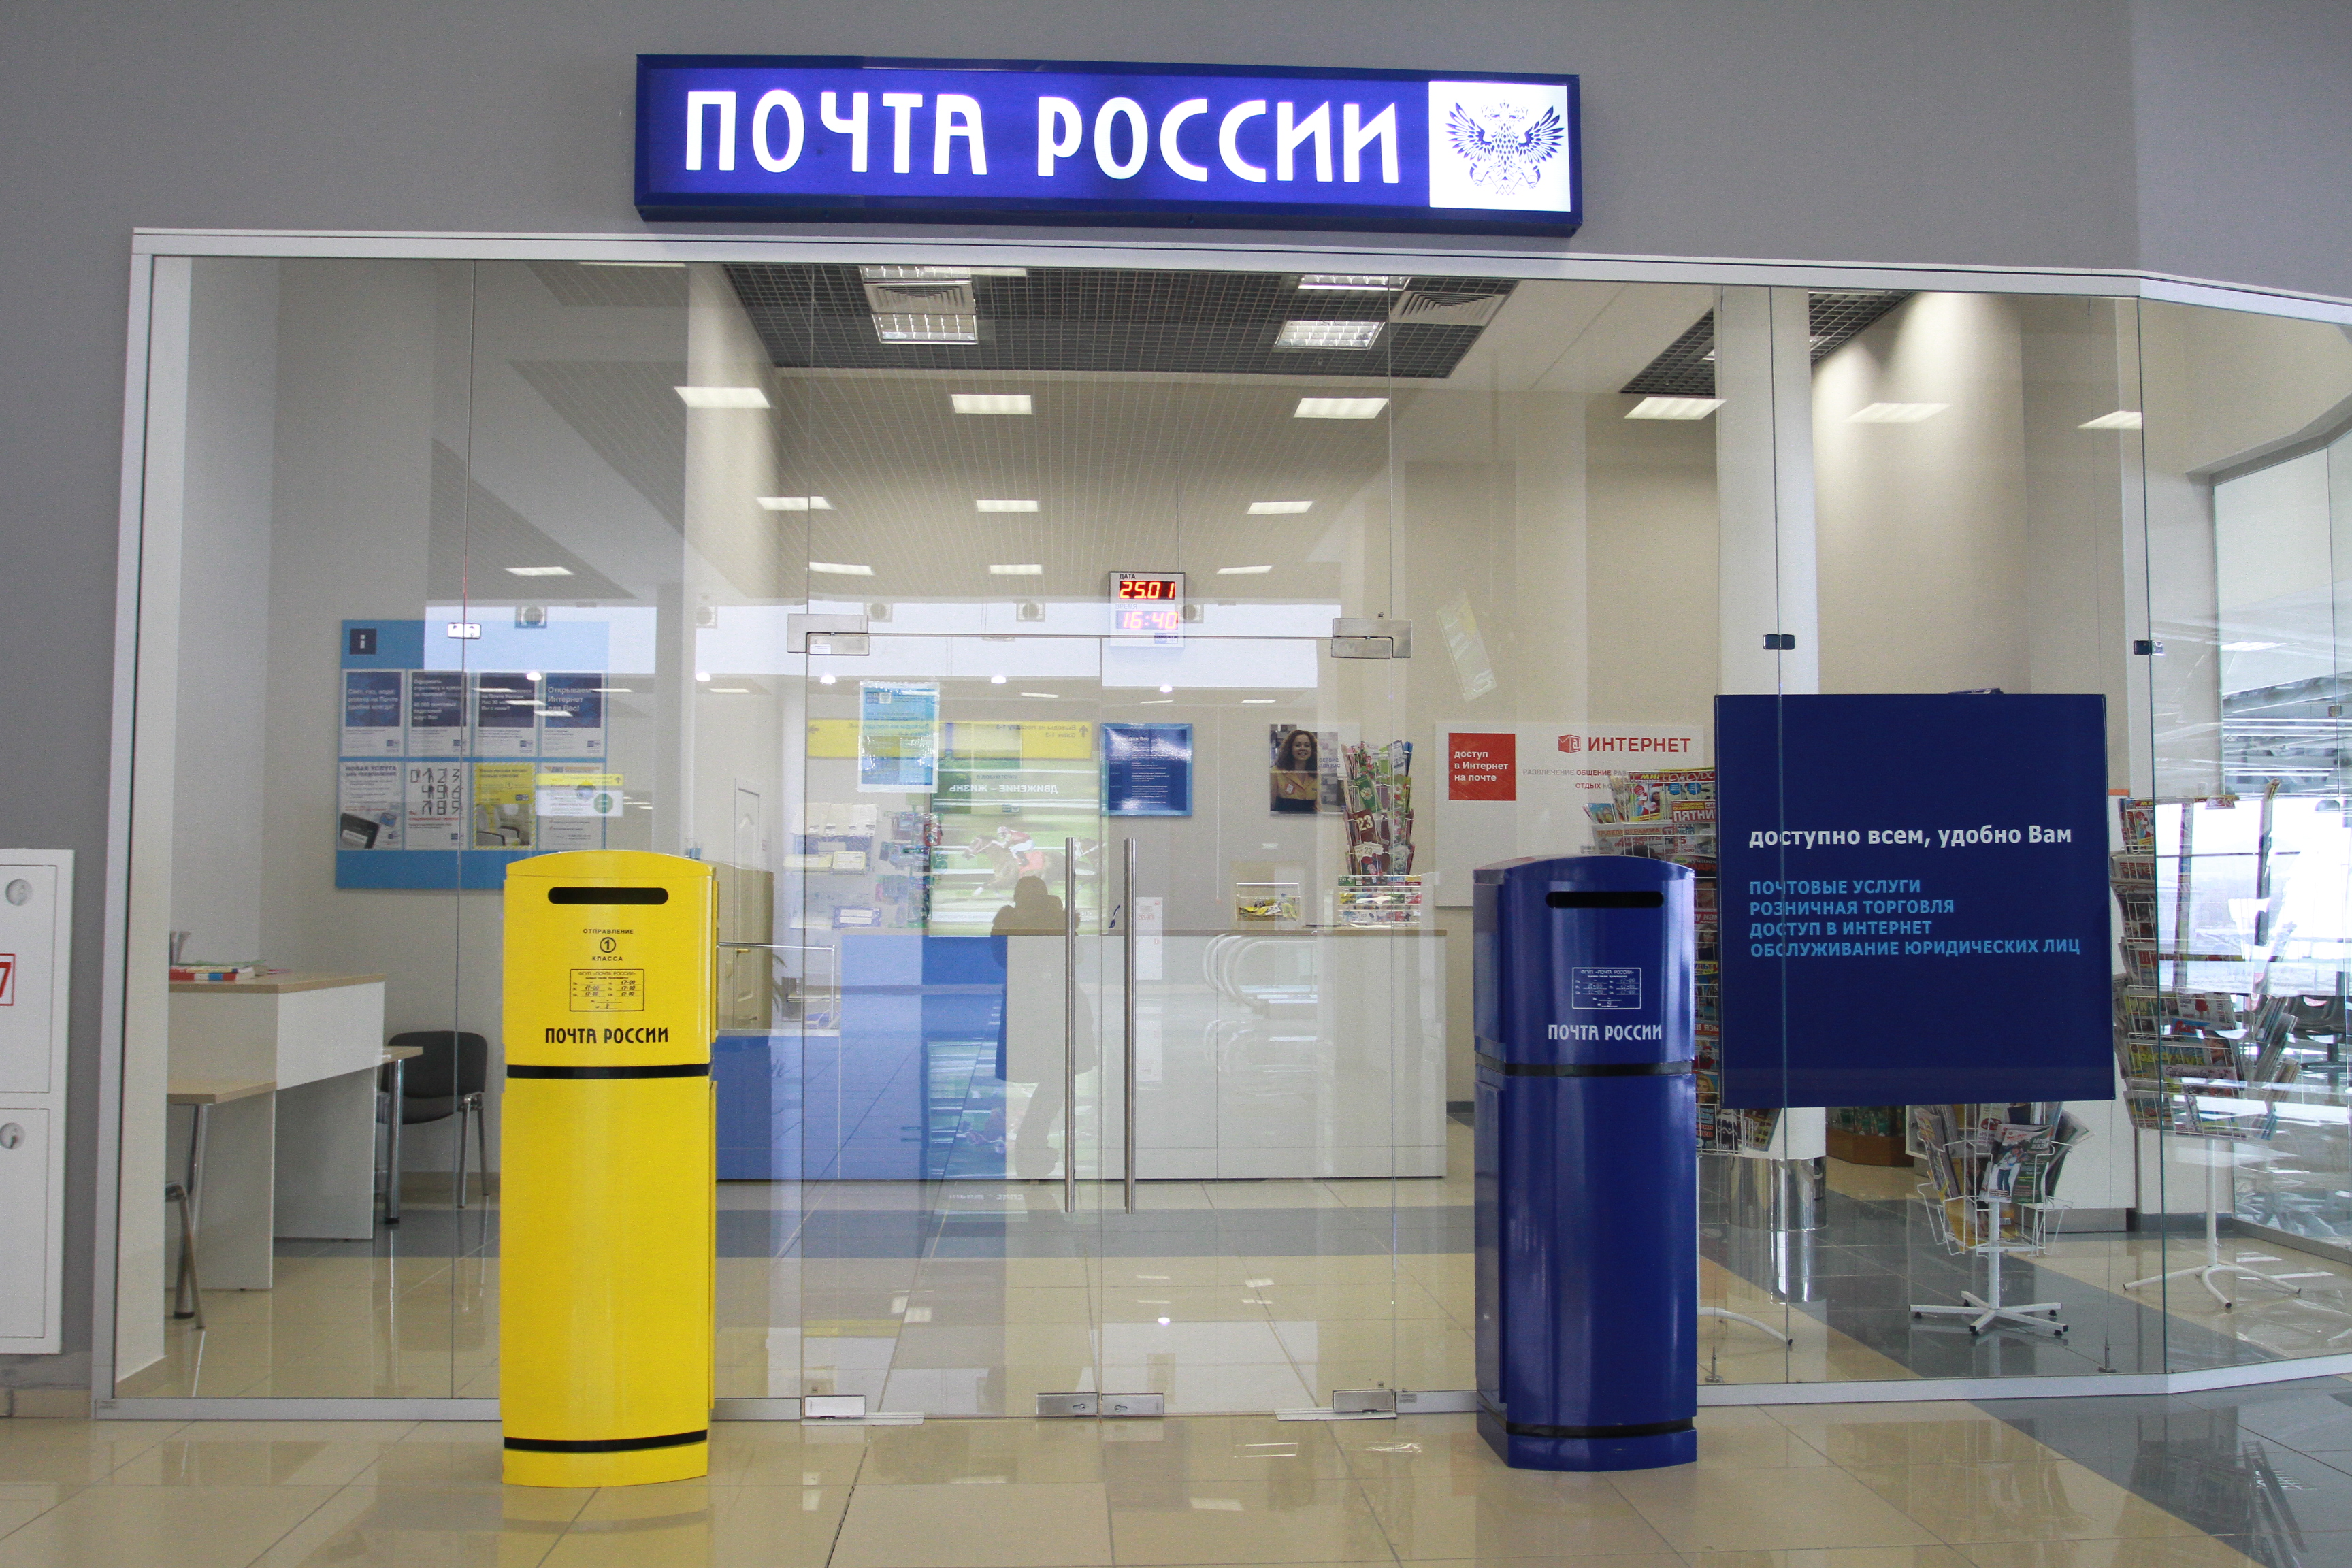 http://positime.ru/wp-content/uploads/2013/07/mail-of-russia-will-provide-customers-with-banking-services.jpg